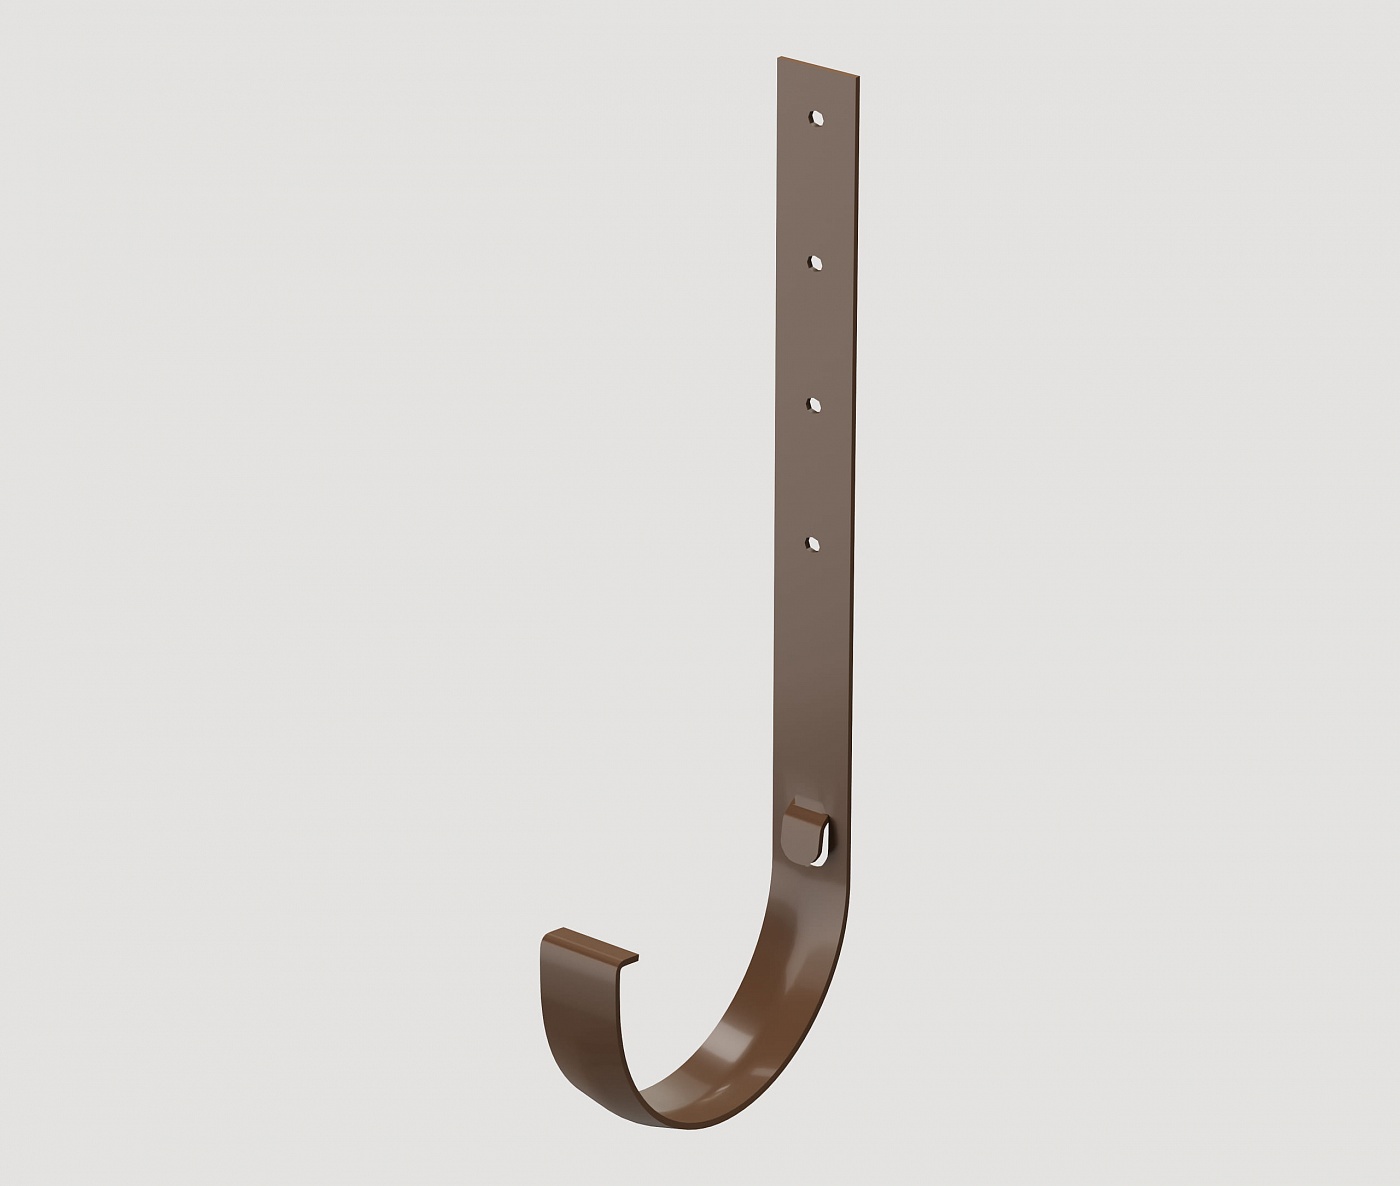 Водостоки - STANDARD SERIES Light brown RAL 8019 - Elements of the drainage system - Gutter metal bracket